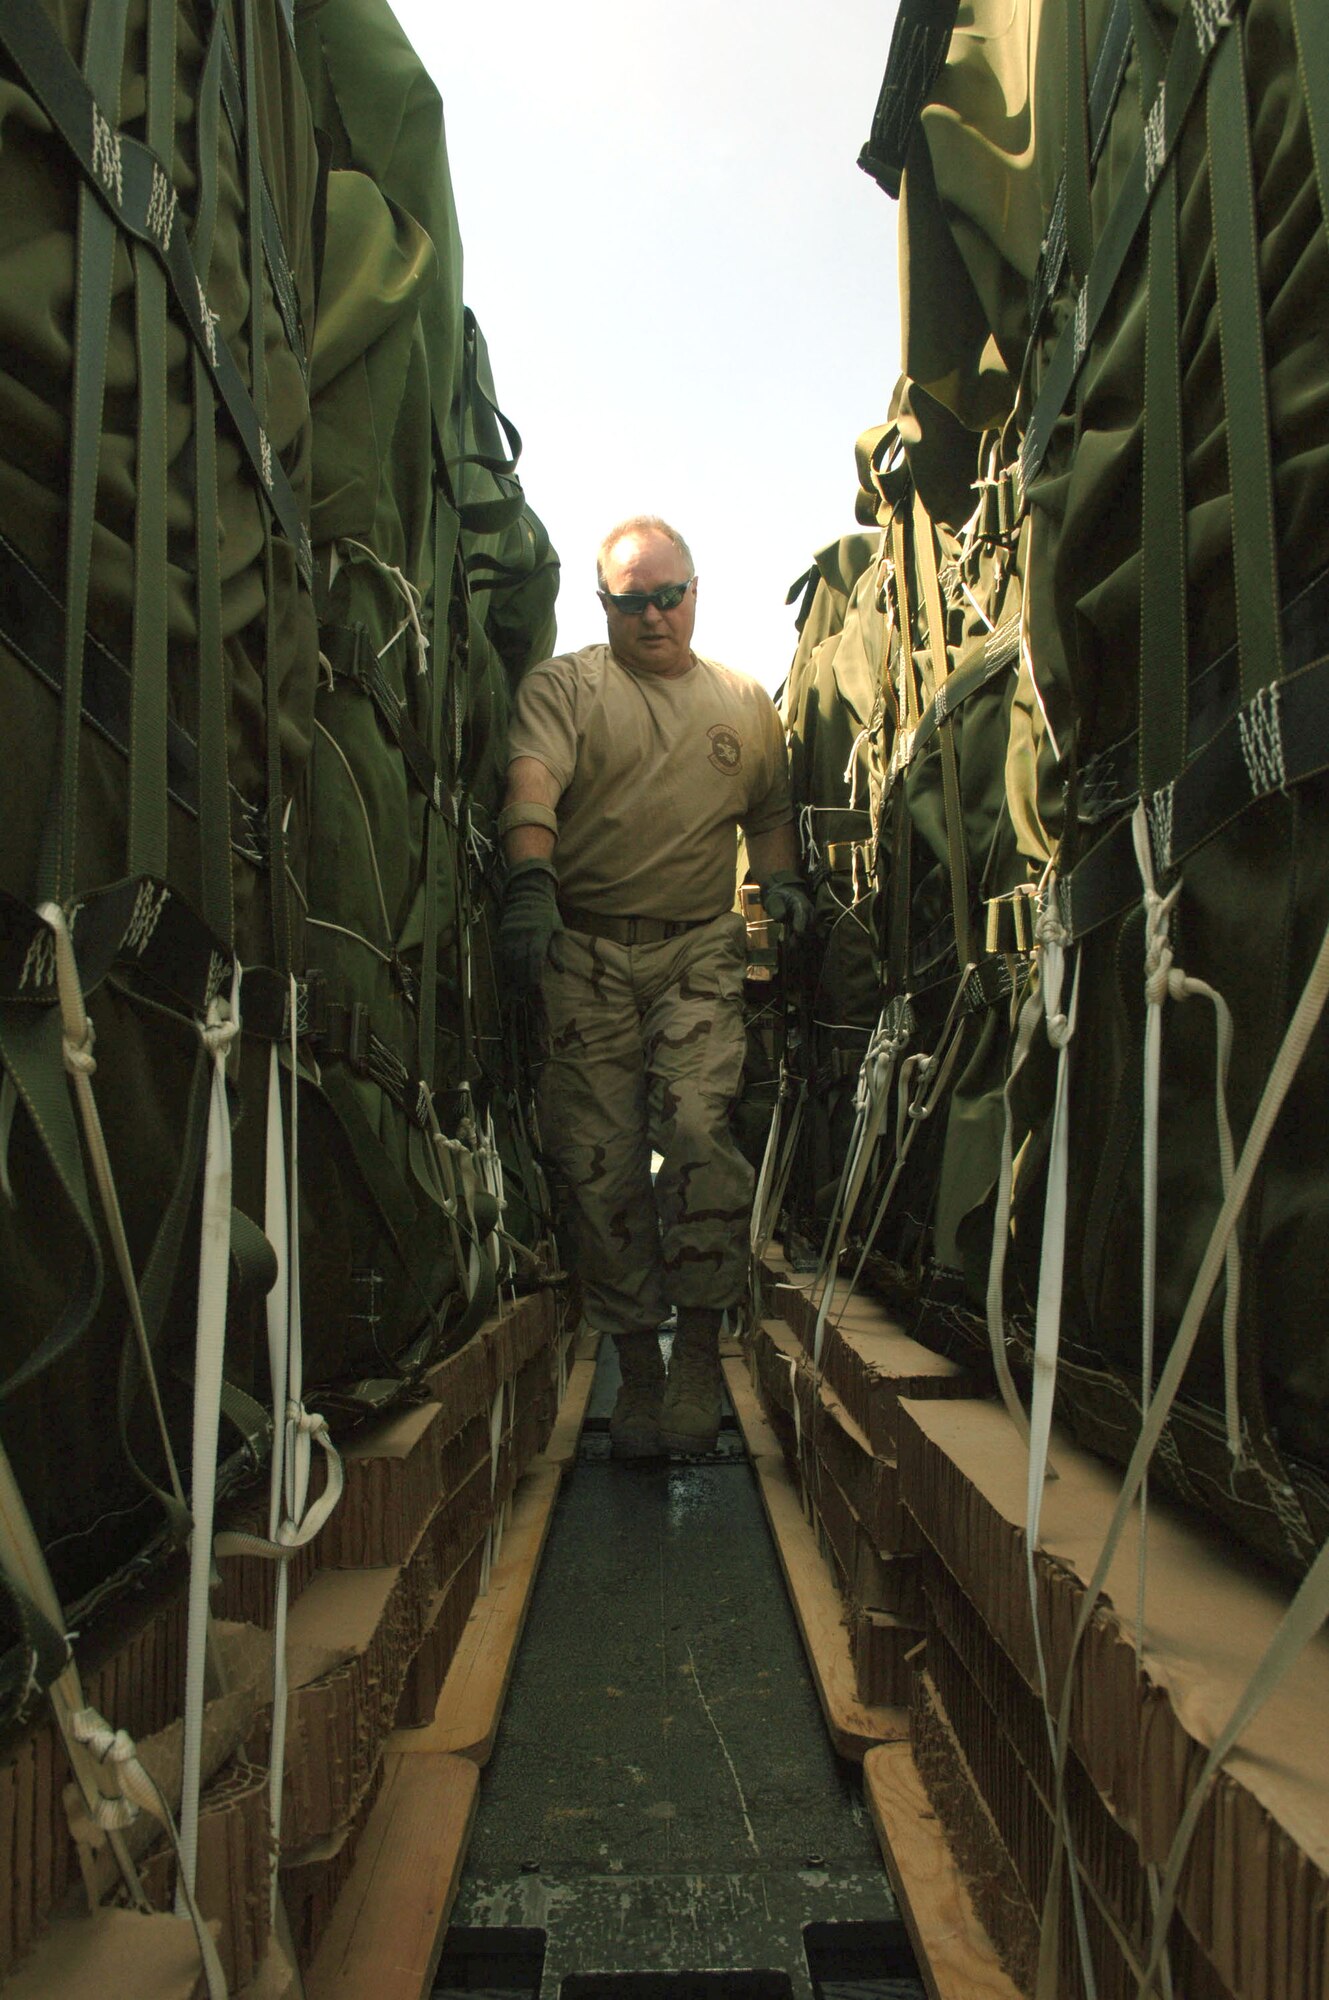 Chief Master Sgt. Gary Lanham inspects pallets before they are loaded onto a C-130 Hercules from the 774th Expeditionary Airlift Squadron on Saturday, April 15, 2006. Chief Lanham is the squadron's loadmaster superintendent. He is deployed to Bagram Air Base, Afghanistan, from Kulis Air National Guard Base, Alaska. (U.S. Air Force photo/Staff Sgt. Jennifer Redente)